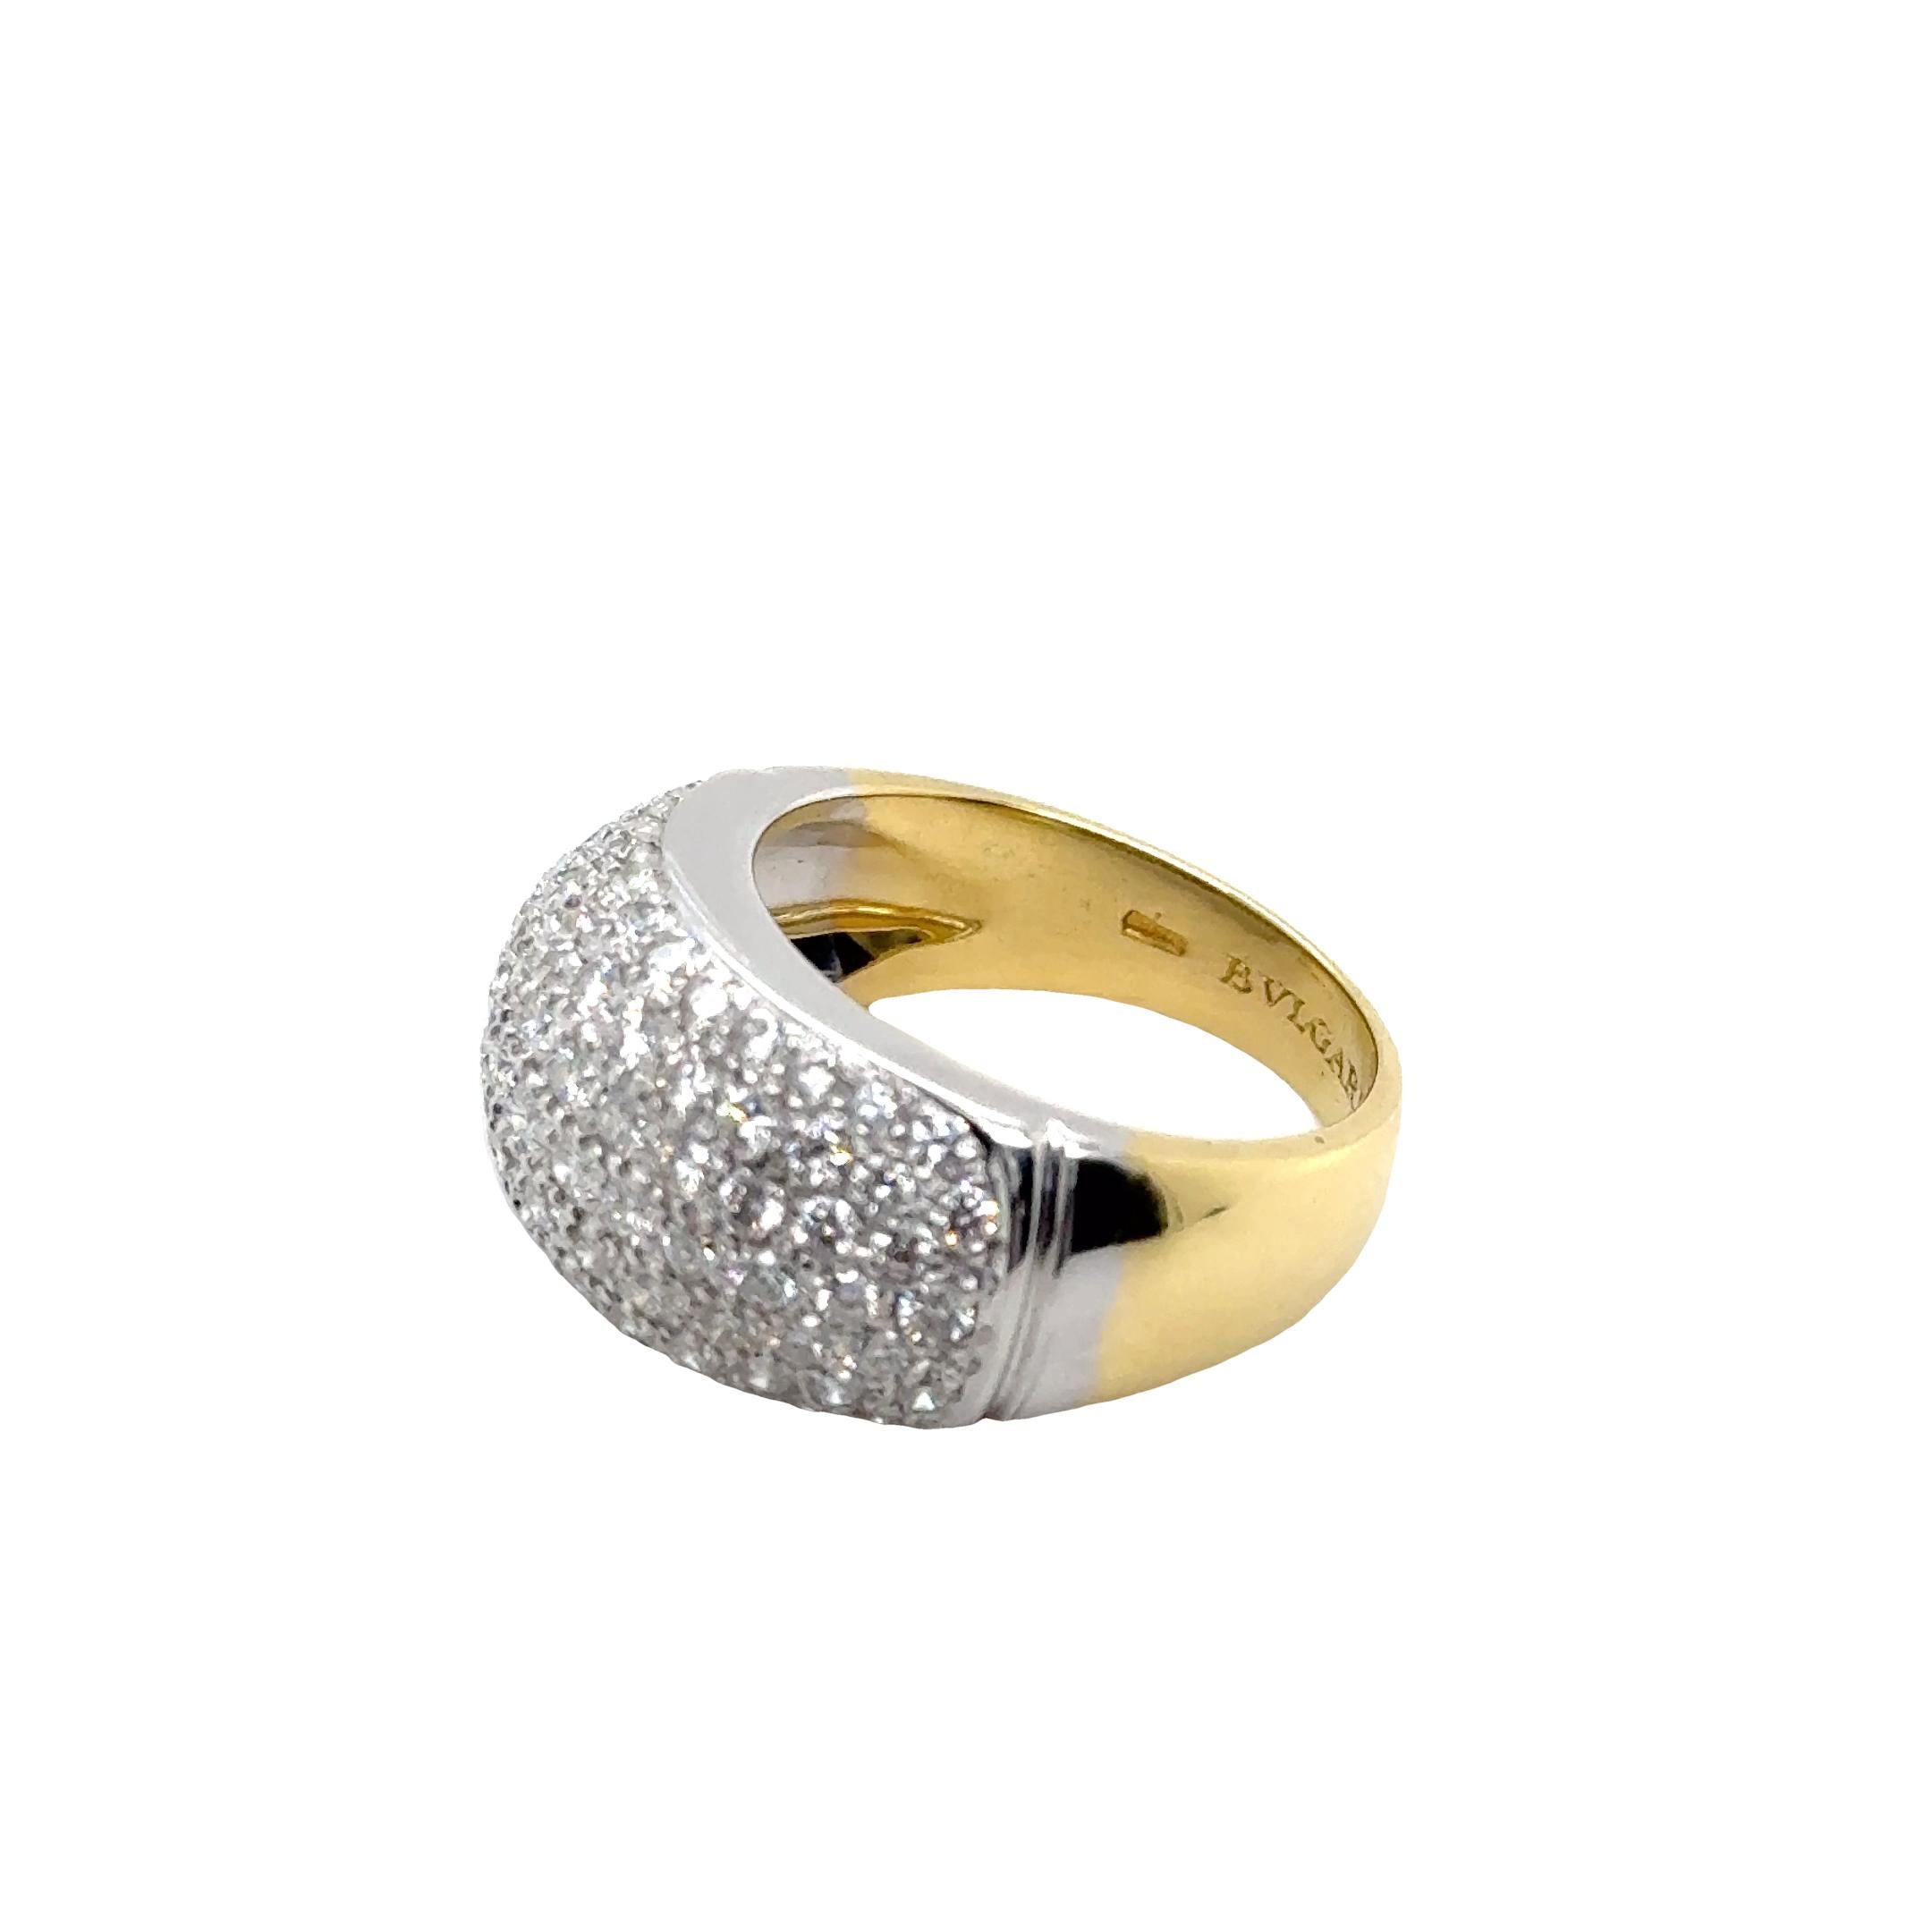 Pre-owned Bulgari Diamond Bombe ring Circa 1990-2000
An impressive Bulgari Diamond Bombe ring set in 18ct yellow and white gold.
A beautiful piece set with 1.60ct of total diamond weight.
Bulgari was founded in 1884 and has since become the powerful